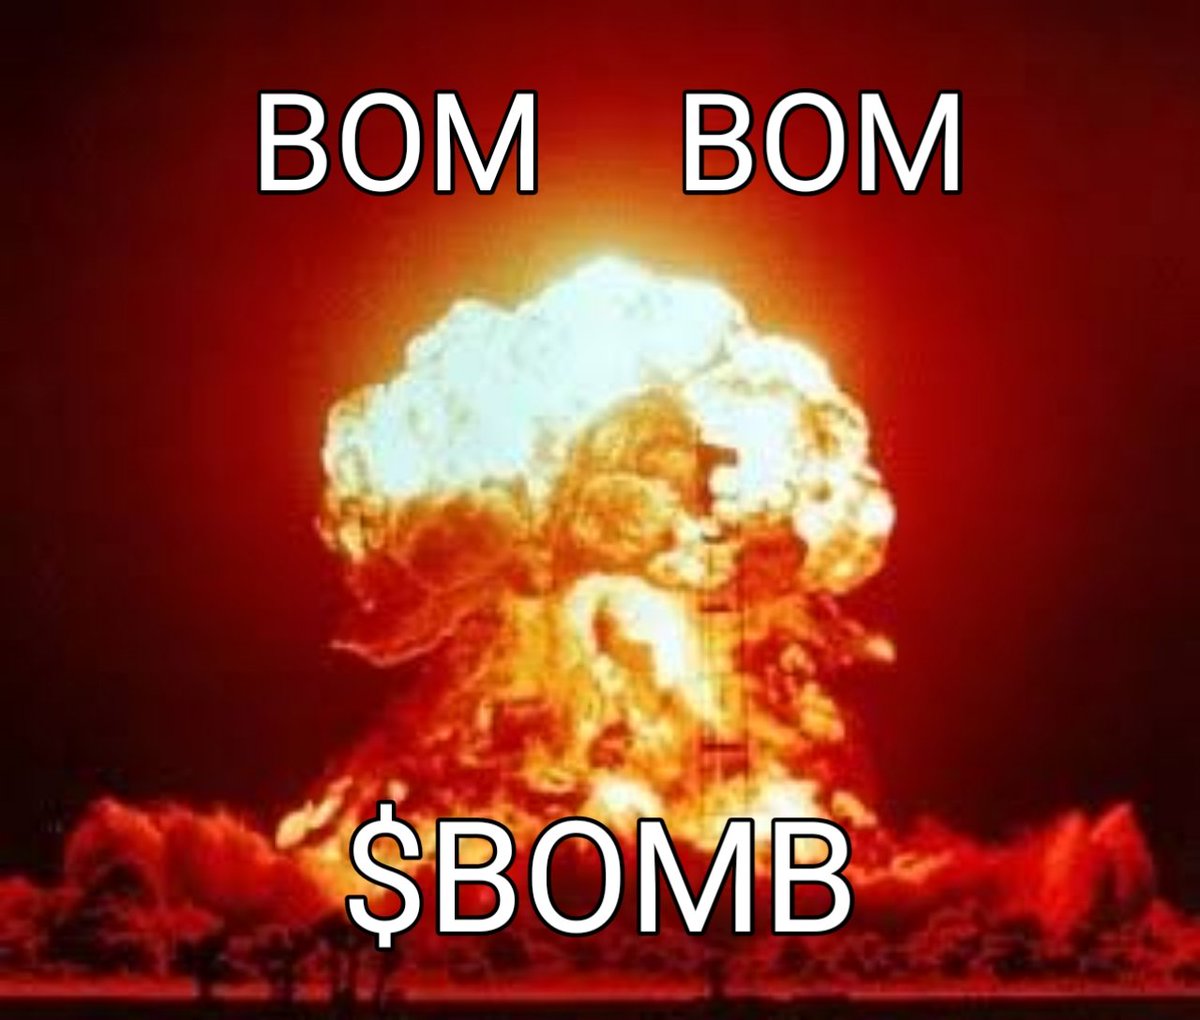 @BombBlast_ Just launched! 🚀 Get in on $BOMB fast!

we are still fucking early🤑🤑🤑 real bullish on $BOMB